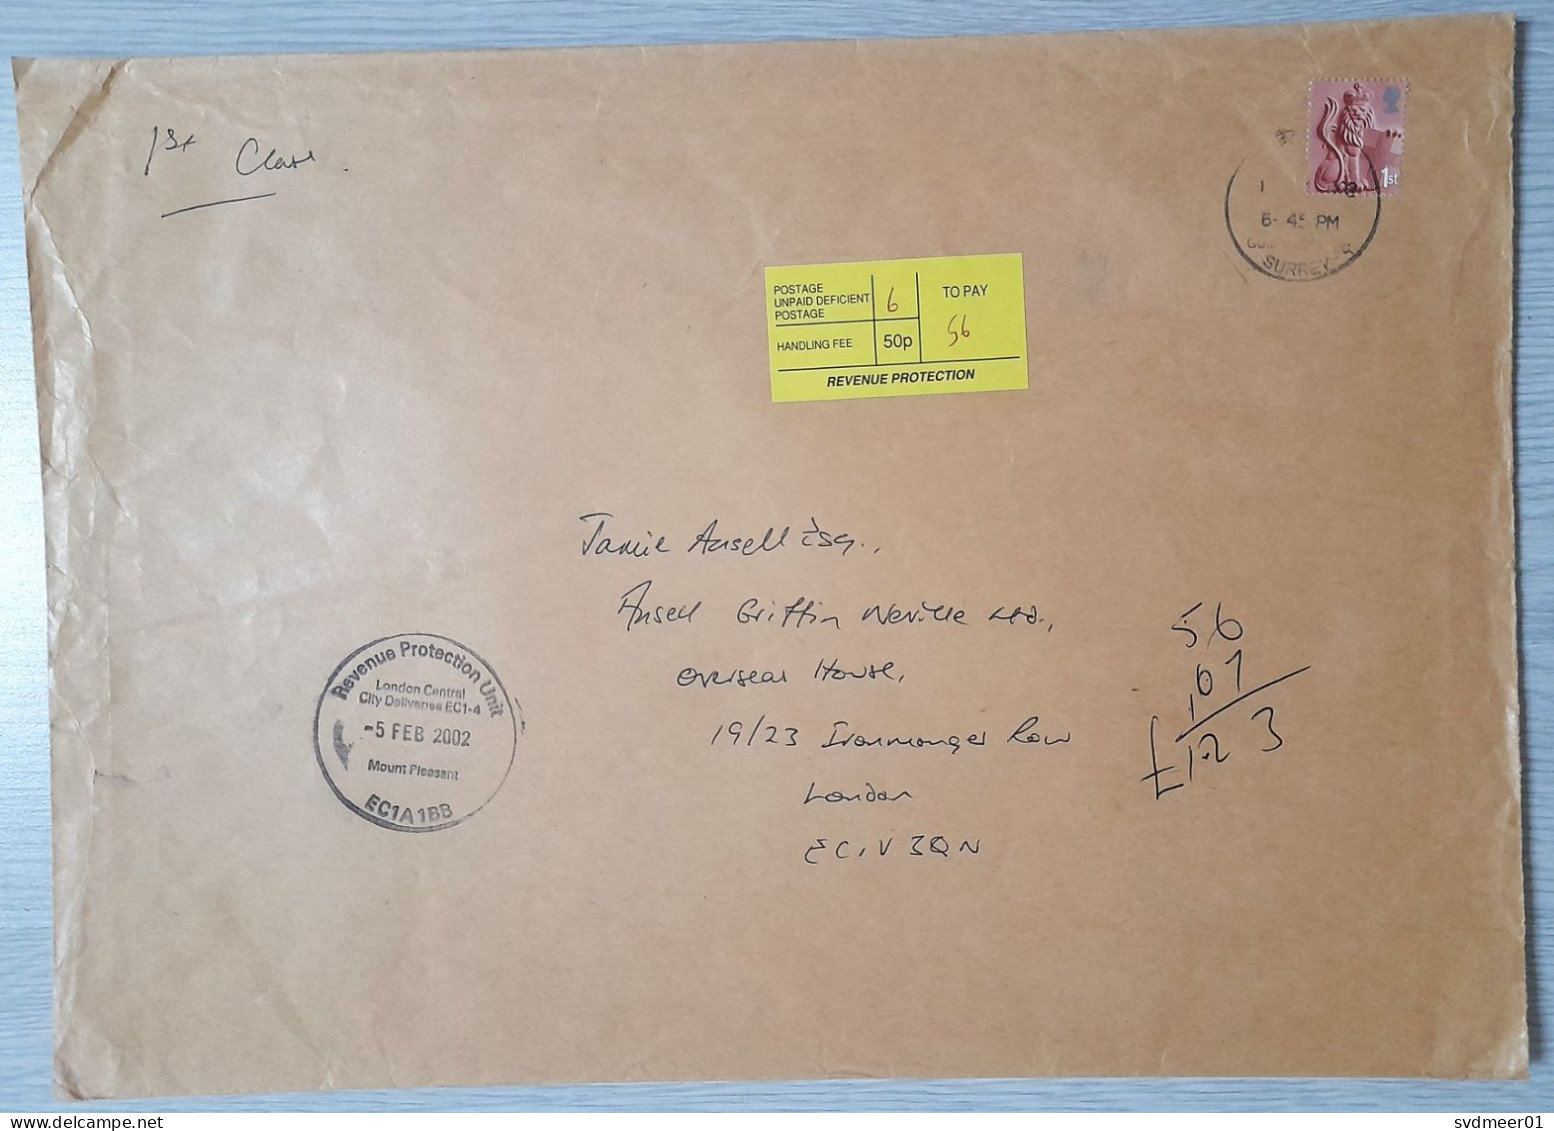 UK: Large Cover, 2002, 1 Stamp, Heraldry, Label & Cancel To Pay, Postage Due, Taxed, Revenue Protection (minor Creases) - Lettres & Documents